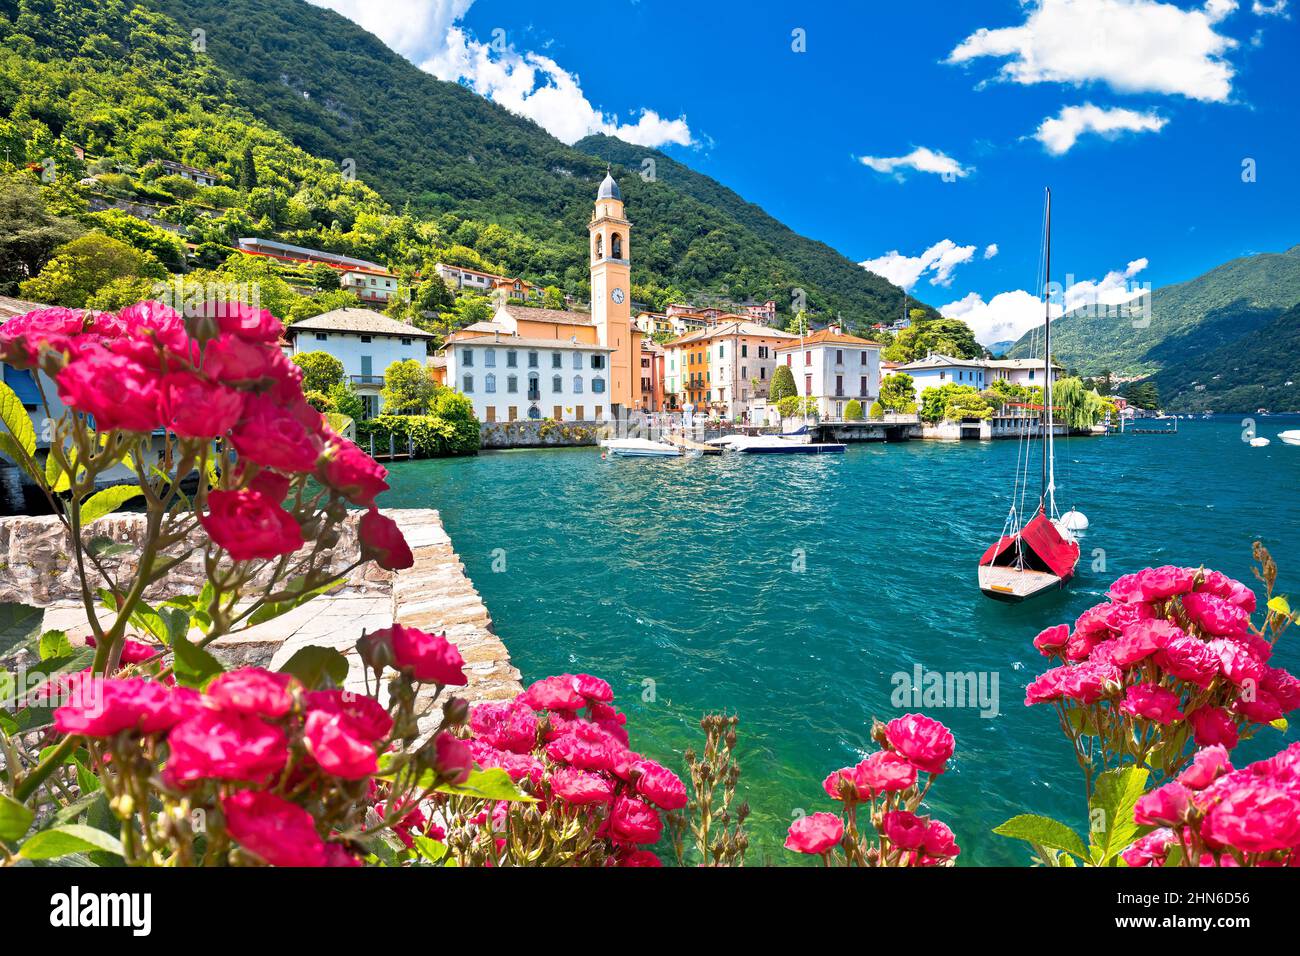 Laglio. Idyllic town of Laglio and Como lake waterfront view, Lombardy region of Italy Stock Photo